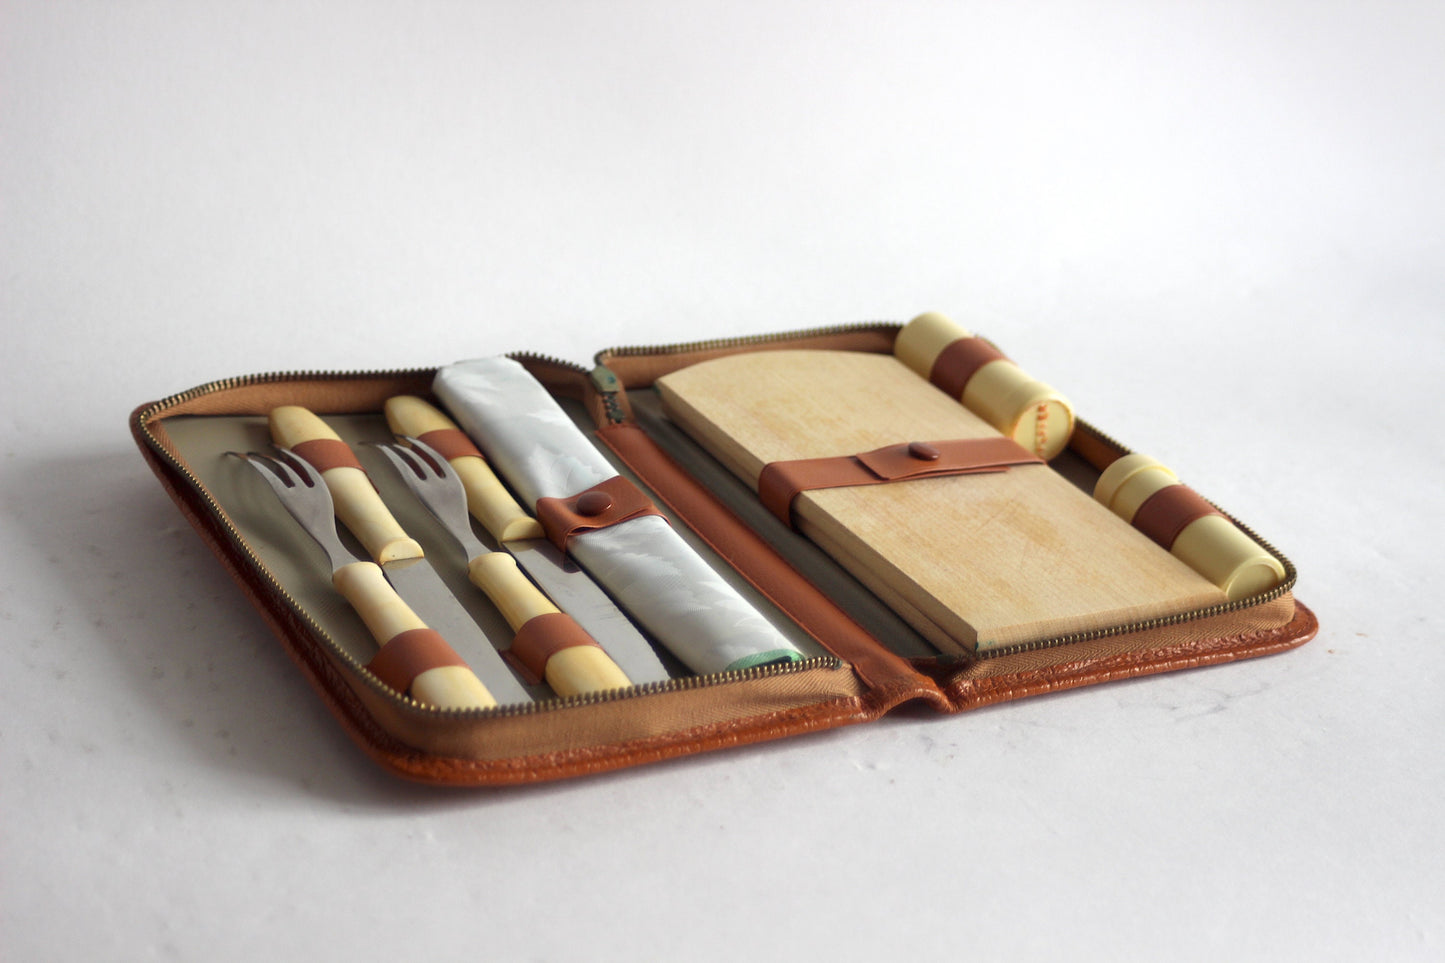 Vintage K&P picnic set / Tourist Set for 2 Set of cutlery Stainless Steel Accessory case for Picnic Camping Accessories to Eat